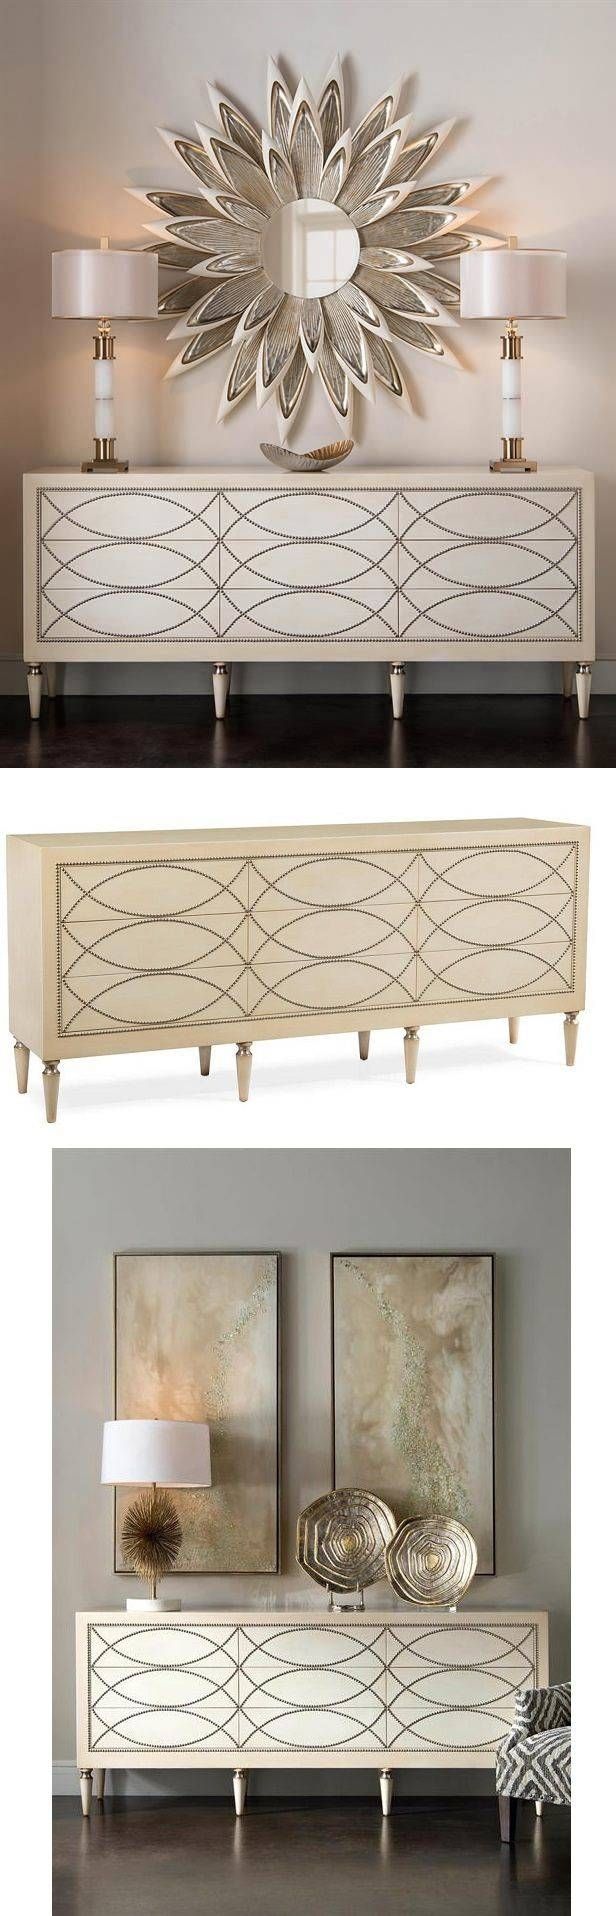 Charming Dining Room Sideboard Beautiful Servers Sideboards And For Small Dining Room Sideboards (View 11 of 15)